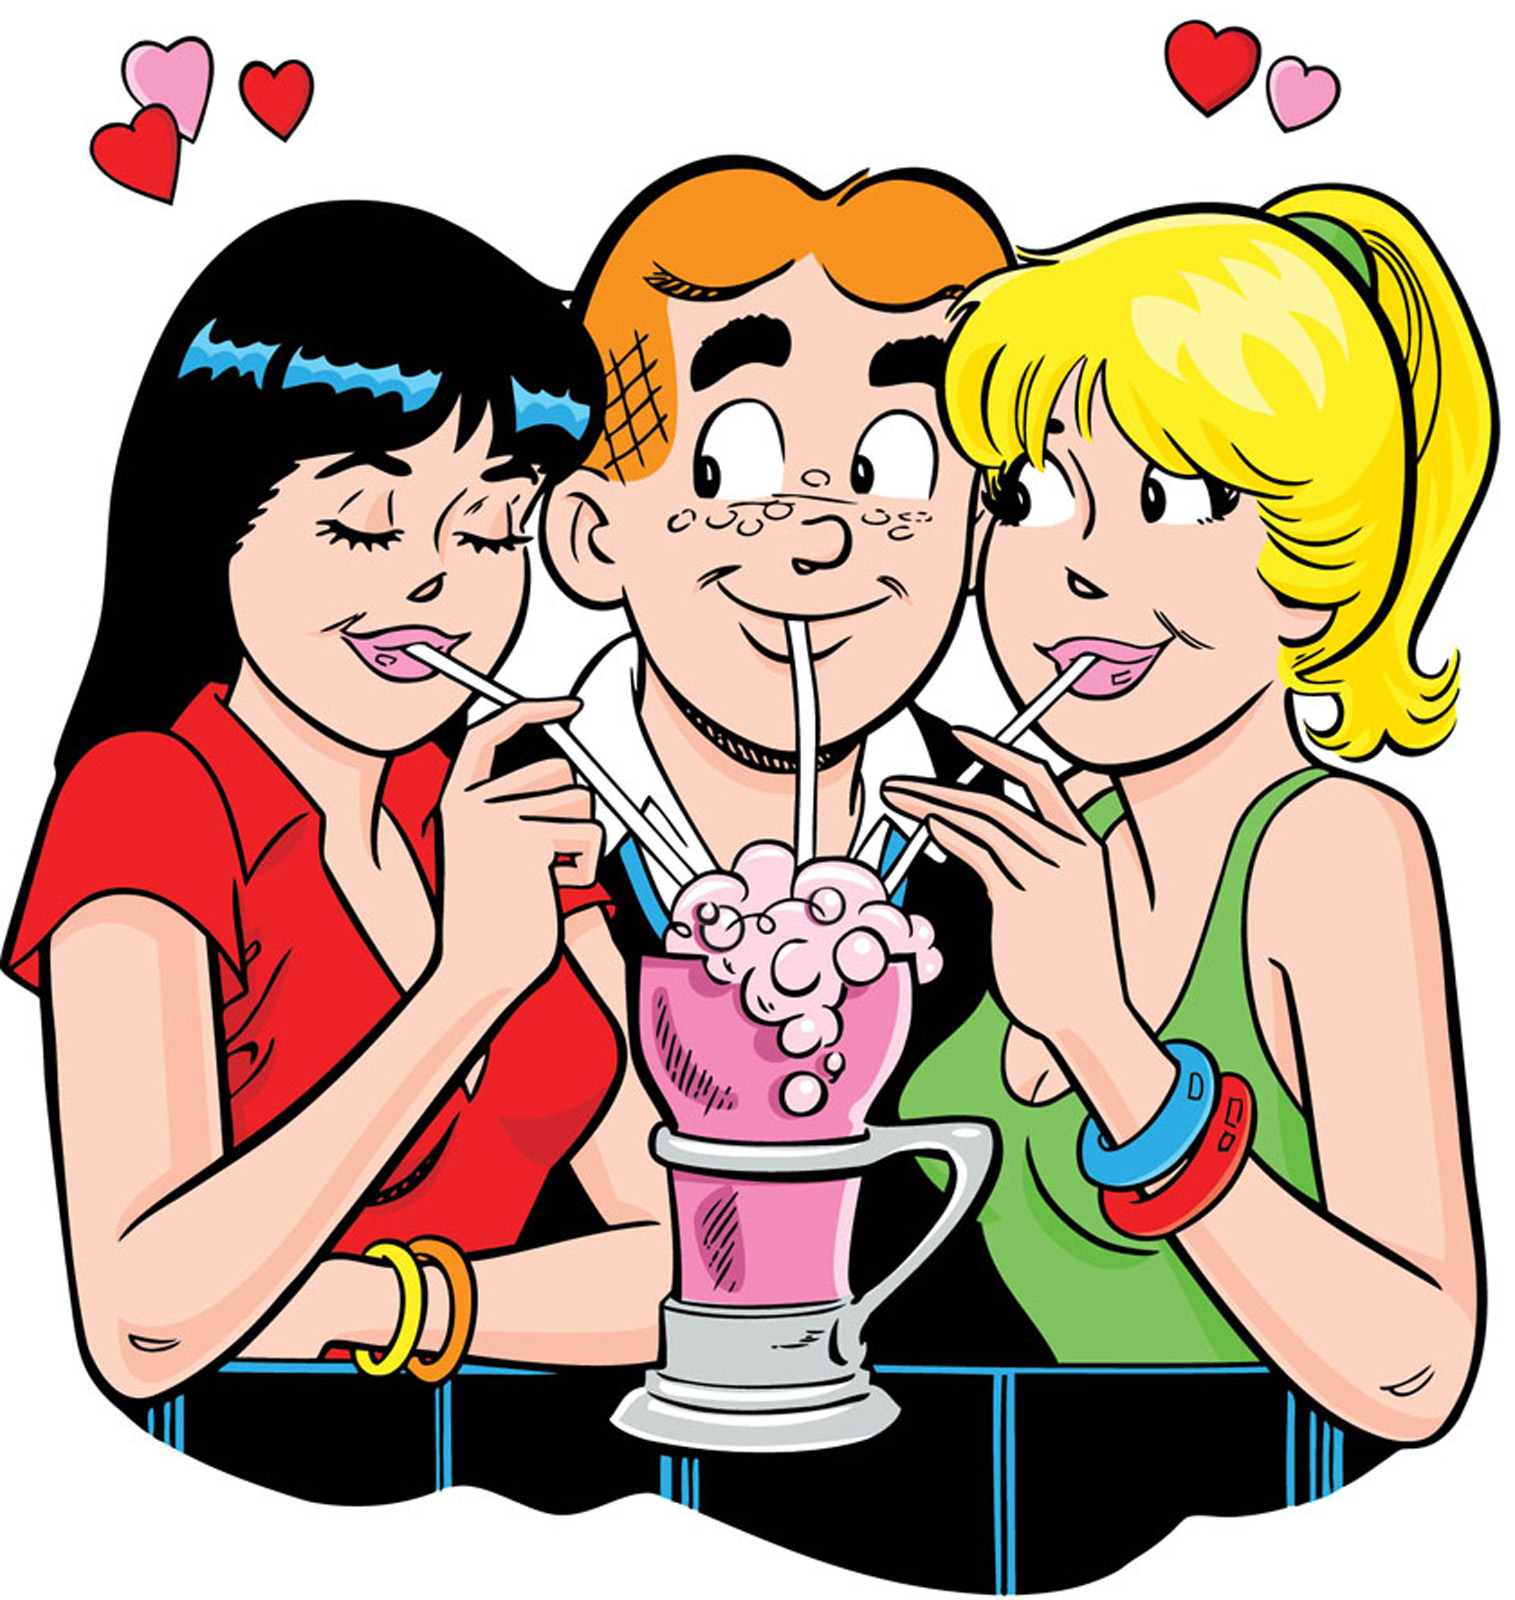 From left: Veronica, Archie, and Betty, characters from the Archie's comic book series.